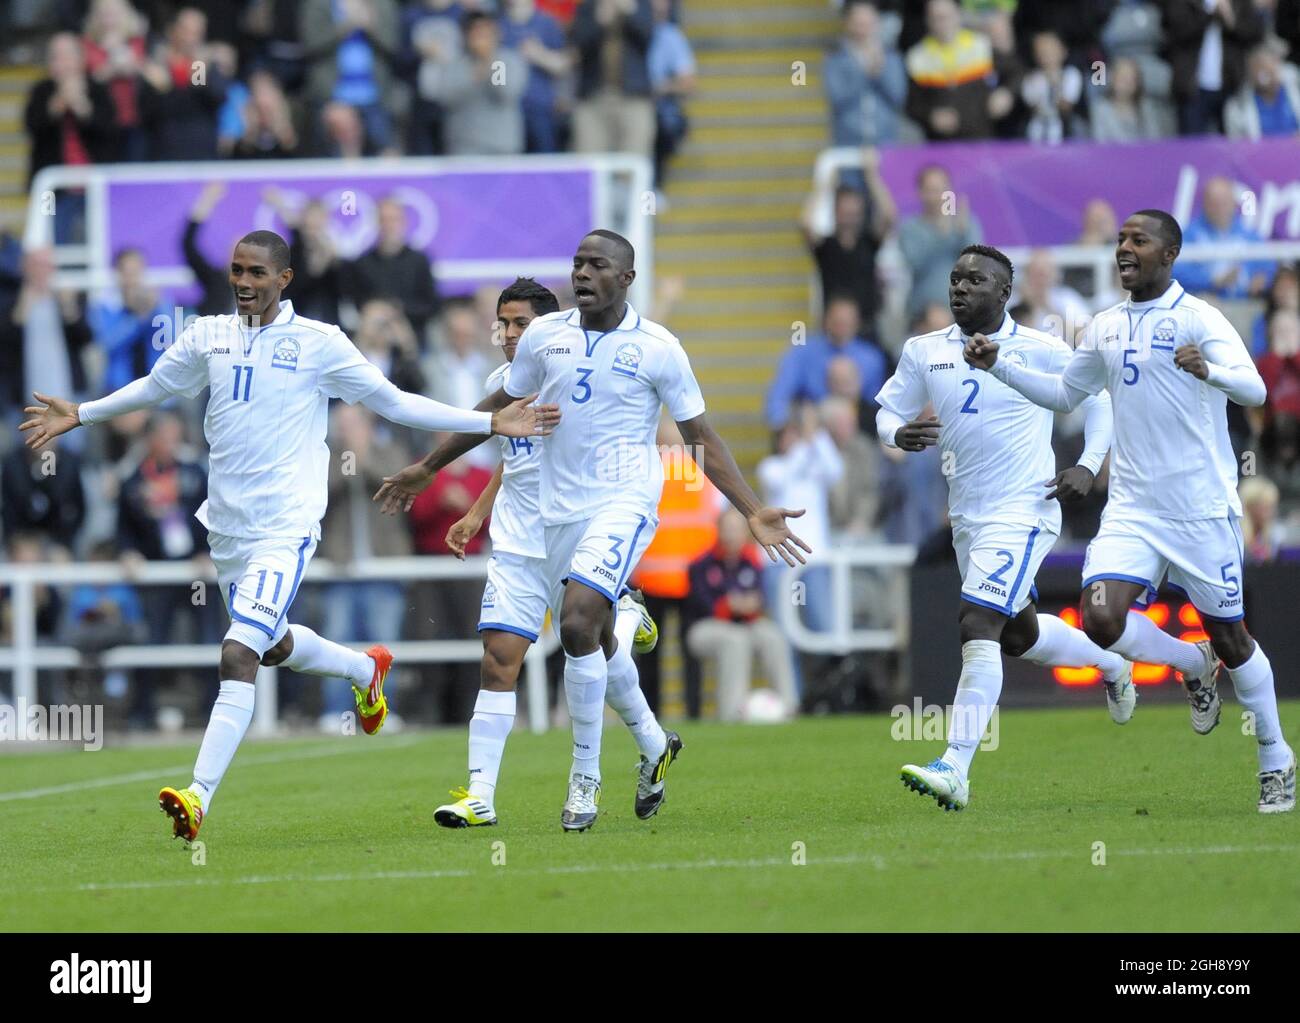 Honduras' Jerry Bengtson (L) celebrates scoring his side's first goal during the London Olympic 2012 first round Group D men's match between Spain v Honduras at the St. James' Park, Newcastle upon Tyne on the 29th July 2012. Stock Photo